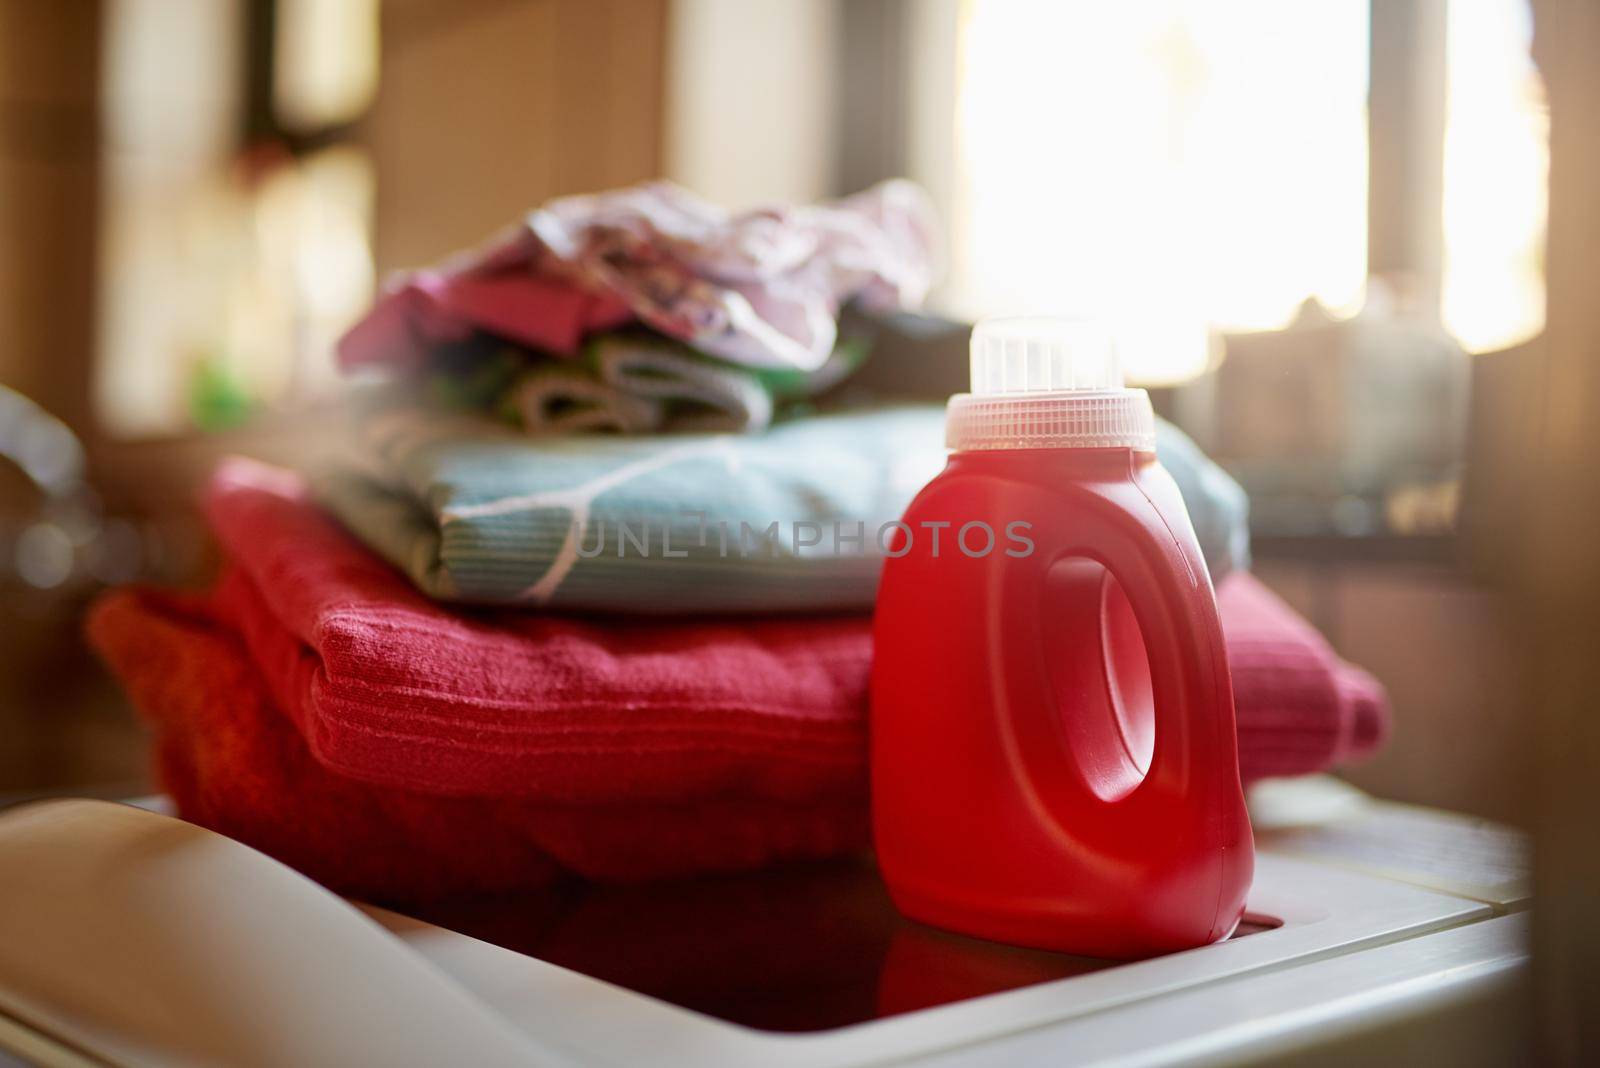 Shot of a bottle of detergent and a pile of laundry on top of a washing machine.